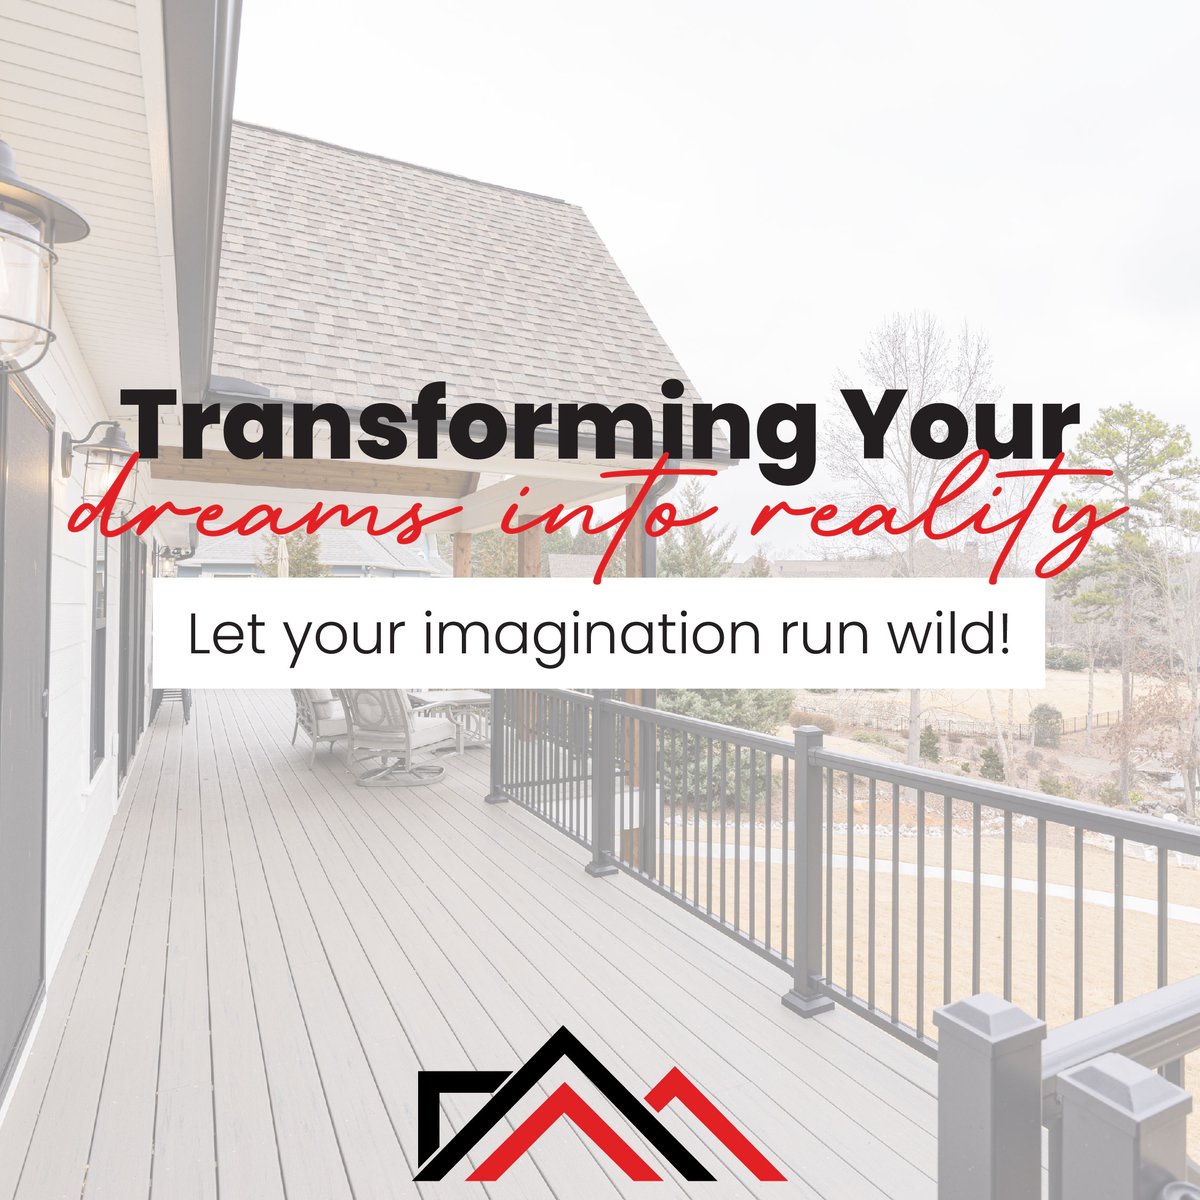 Transforming dreams into reality is our specialty. Let your imagination run wild as we work with you to create the perfect home.

LakeKeoweeBuilders.com

#IntegrityBuilders #LakeKeowee #Seneca #SC #SCBuilder #homebuilder #customhome #construction #architecture #design #building